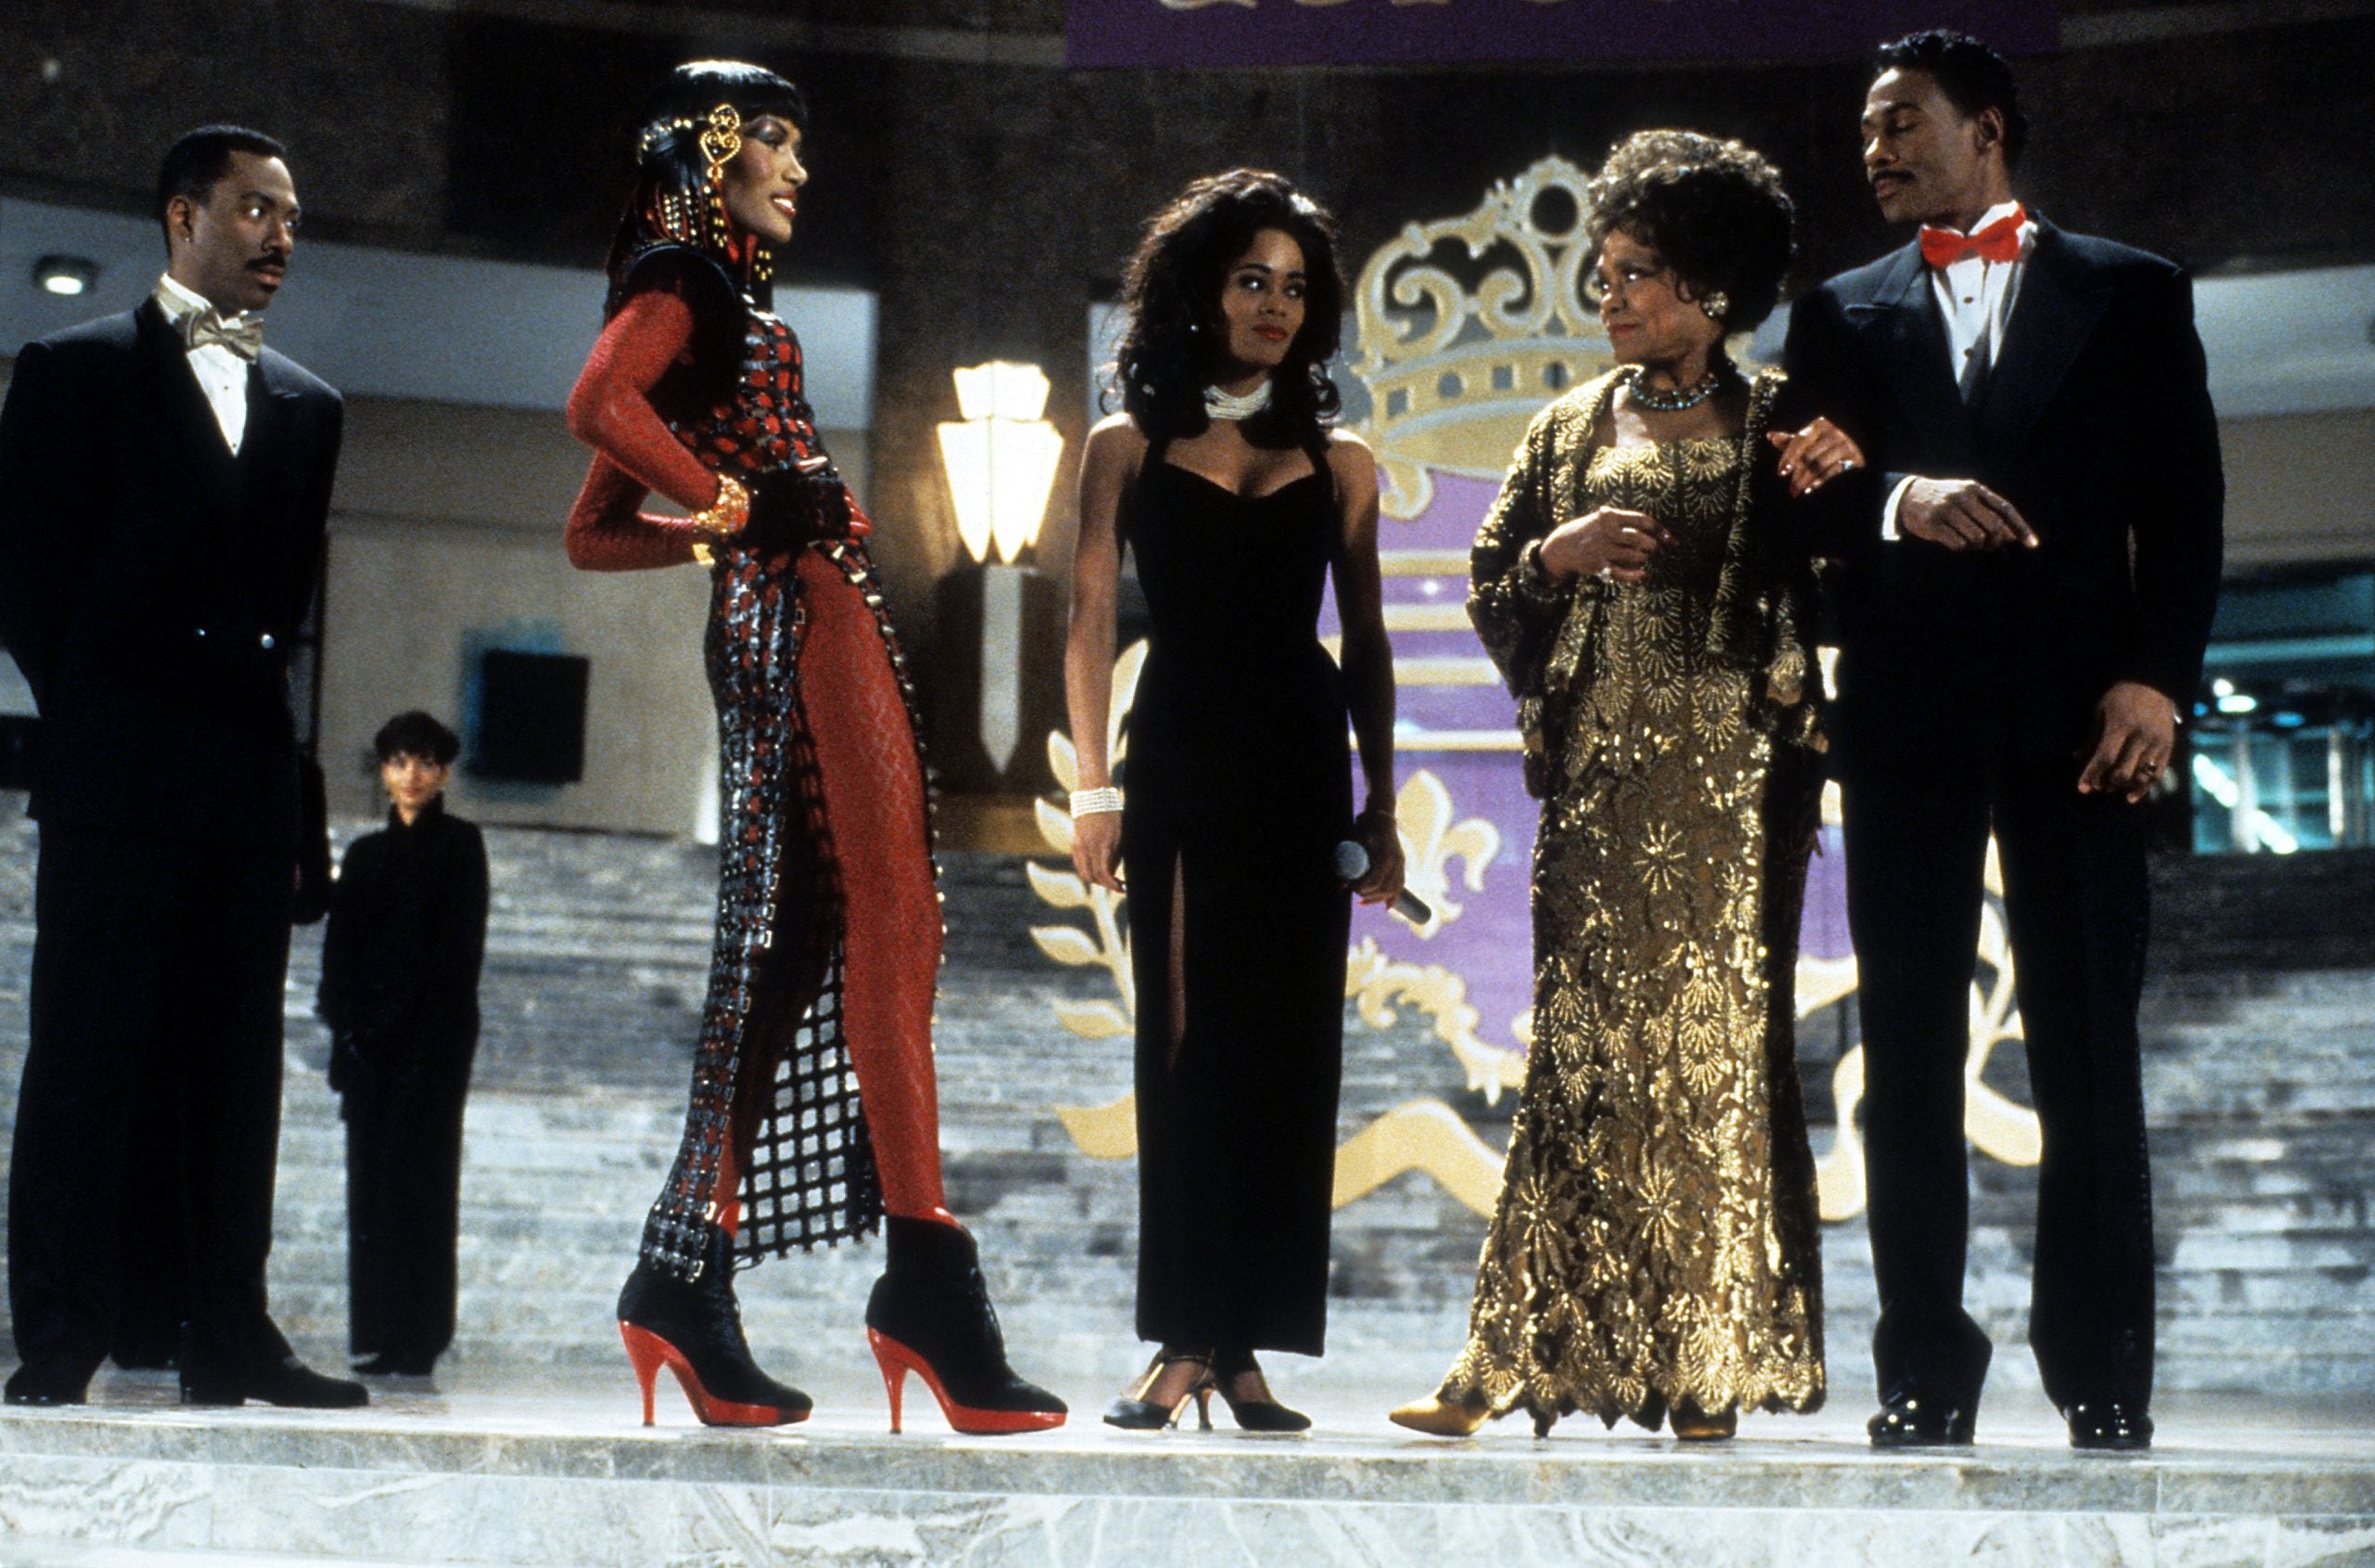 Looking Back At Fashion Moments In Film: ‘Boomerang’